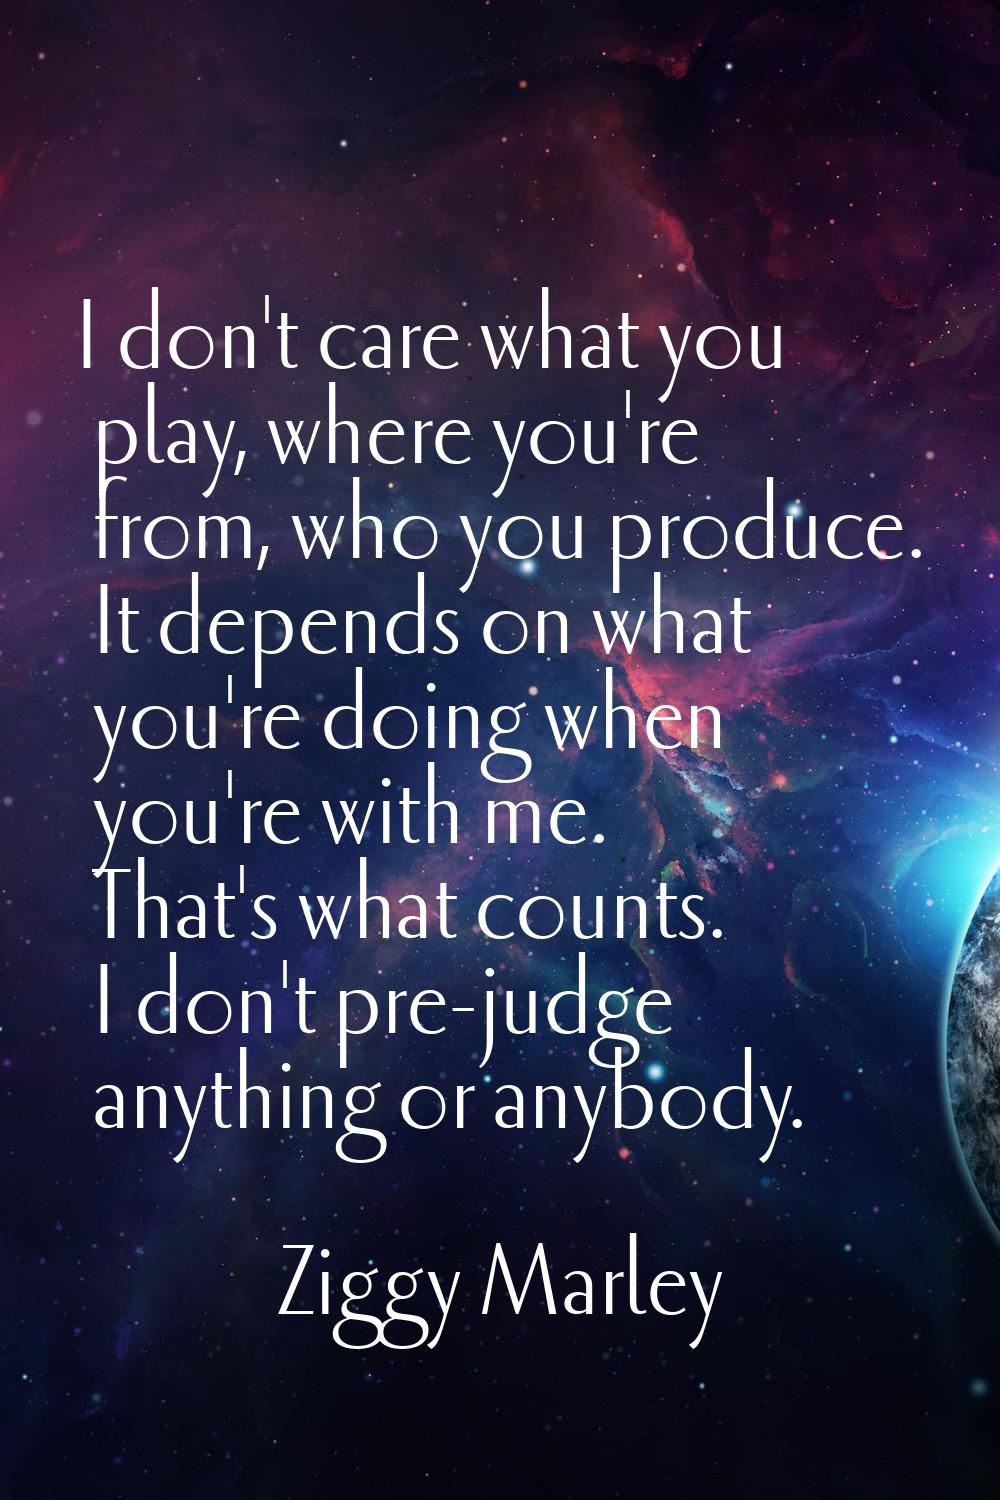 I don't care what you play, where you're from, who you produce. It depends on what you're doing whe